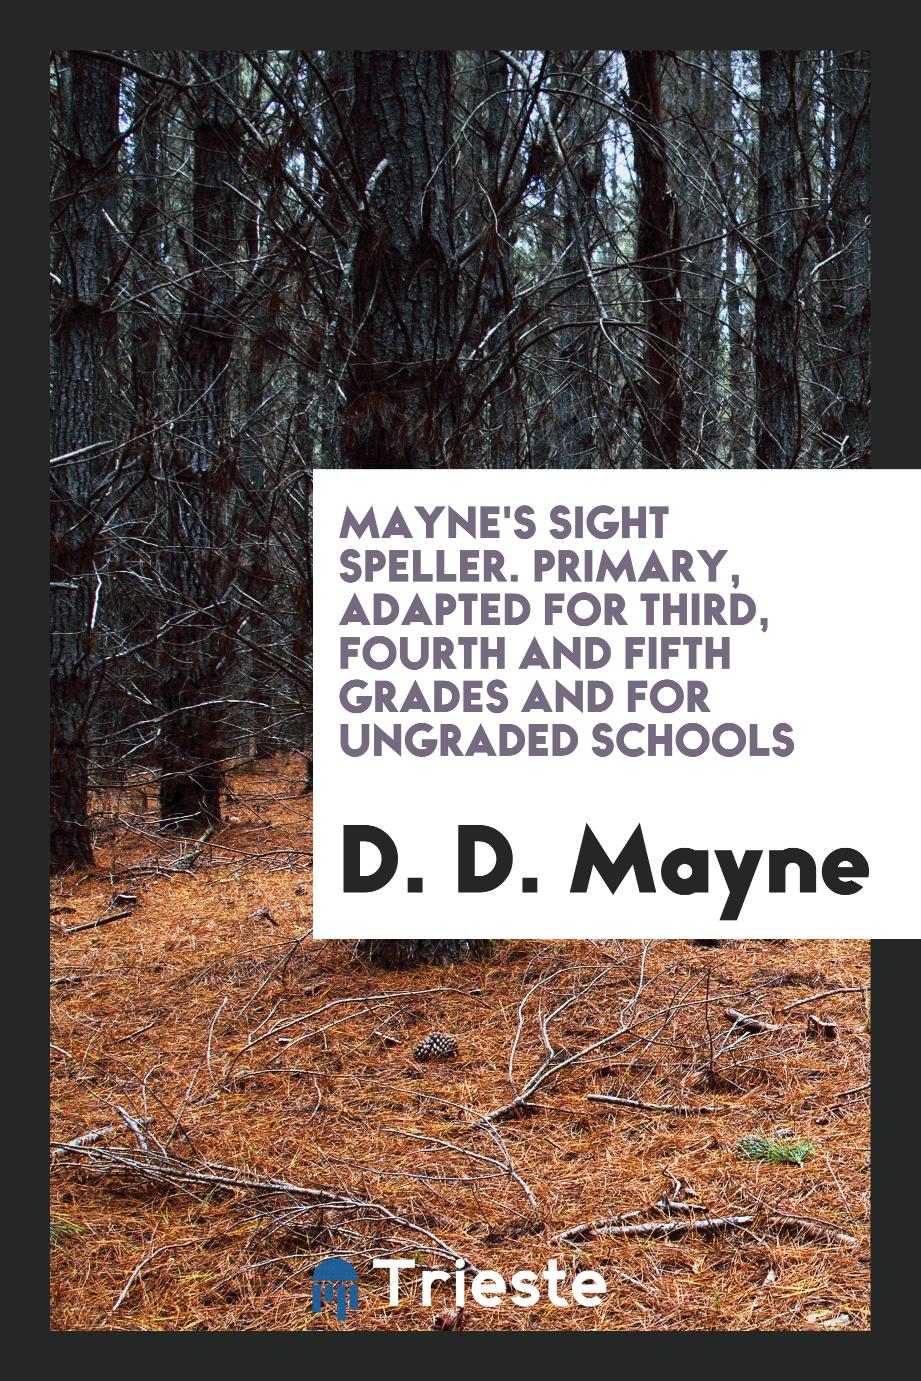 Mayne's Sight Speller. Primary, Adapted for Third, Fourth and Fifth Grades and for ungraded schools